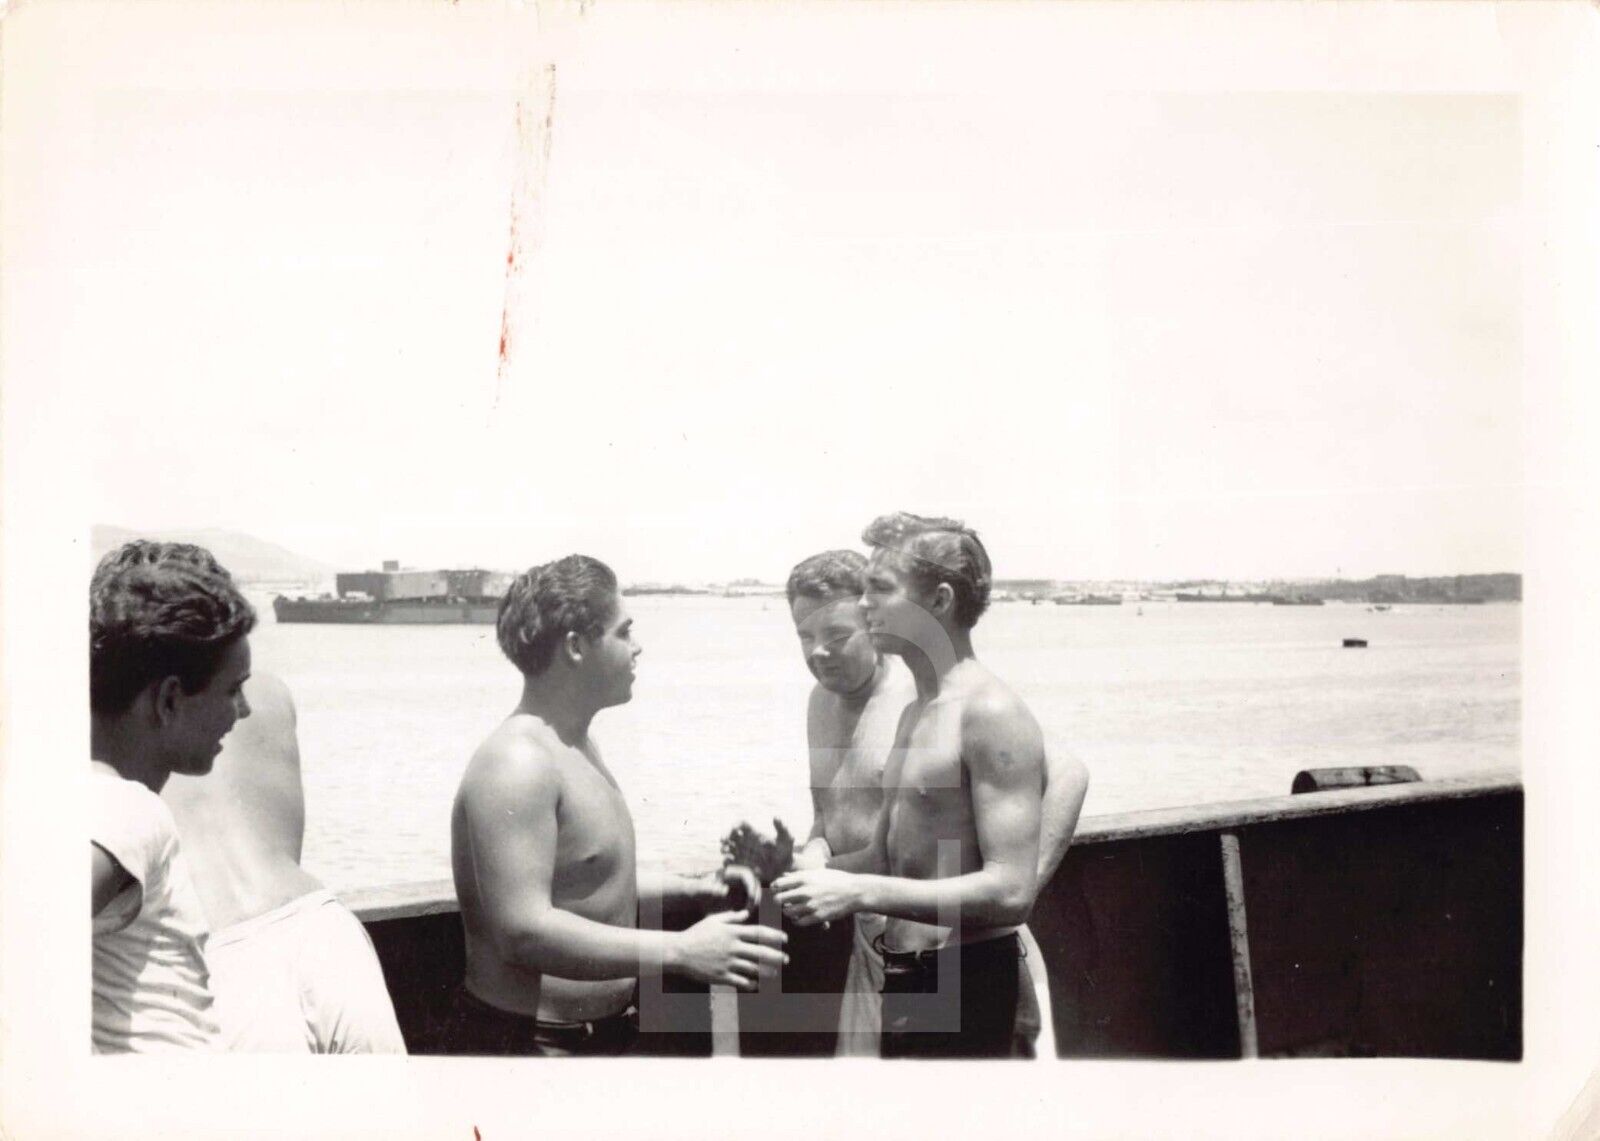 1930s Original Photo Attractive Shirtless Young Men Portrait Gay Interest 2A1